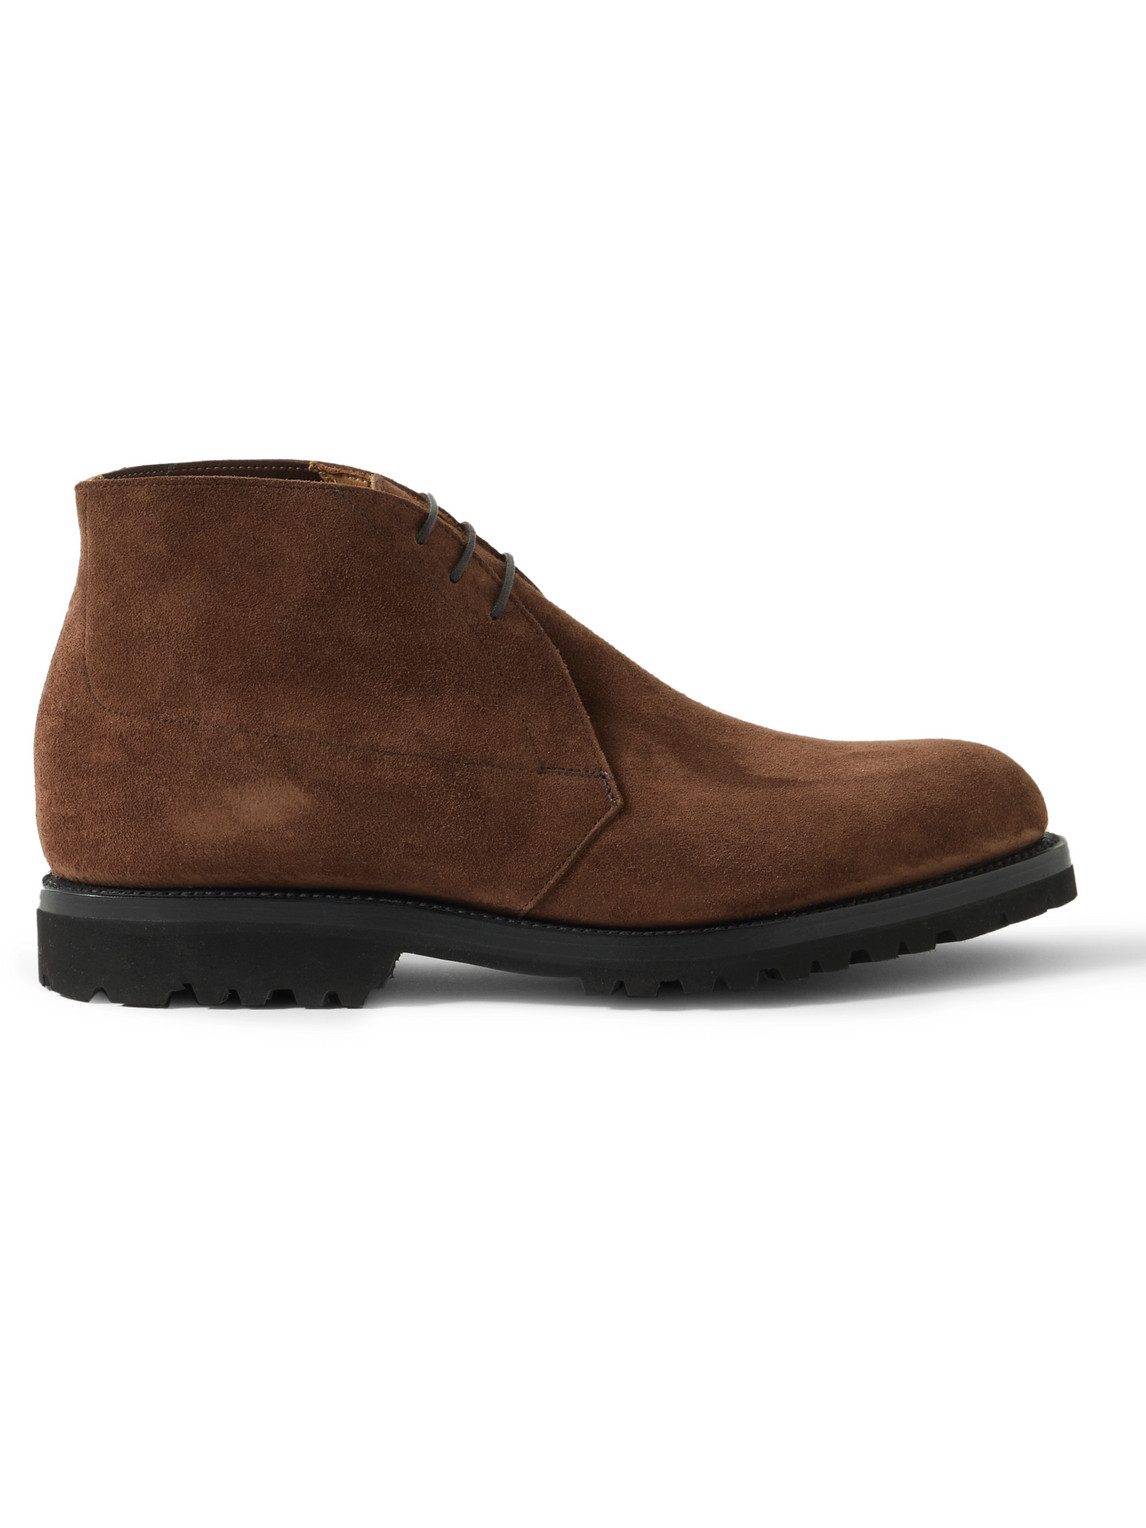 George Cleverley Nathan Suede Chukka Boots In Brown